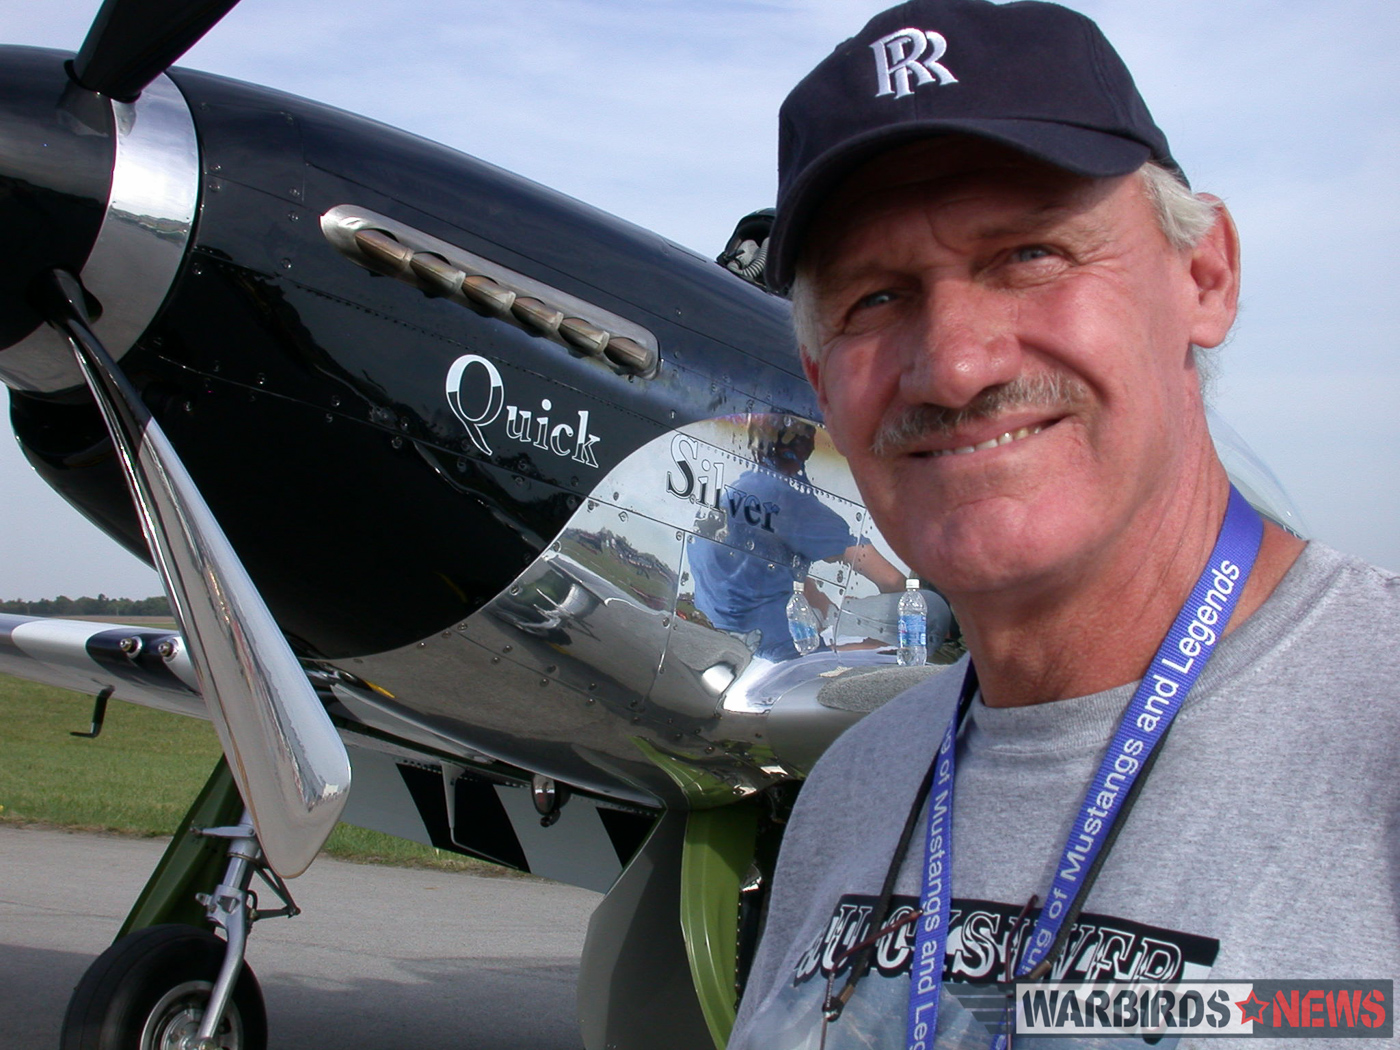 Bill Yoak at the Gathering of Mustangs and Legends in 2007. (photo by Jerry O'Neill)